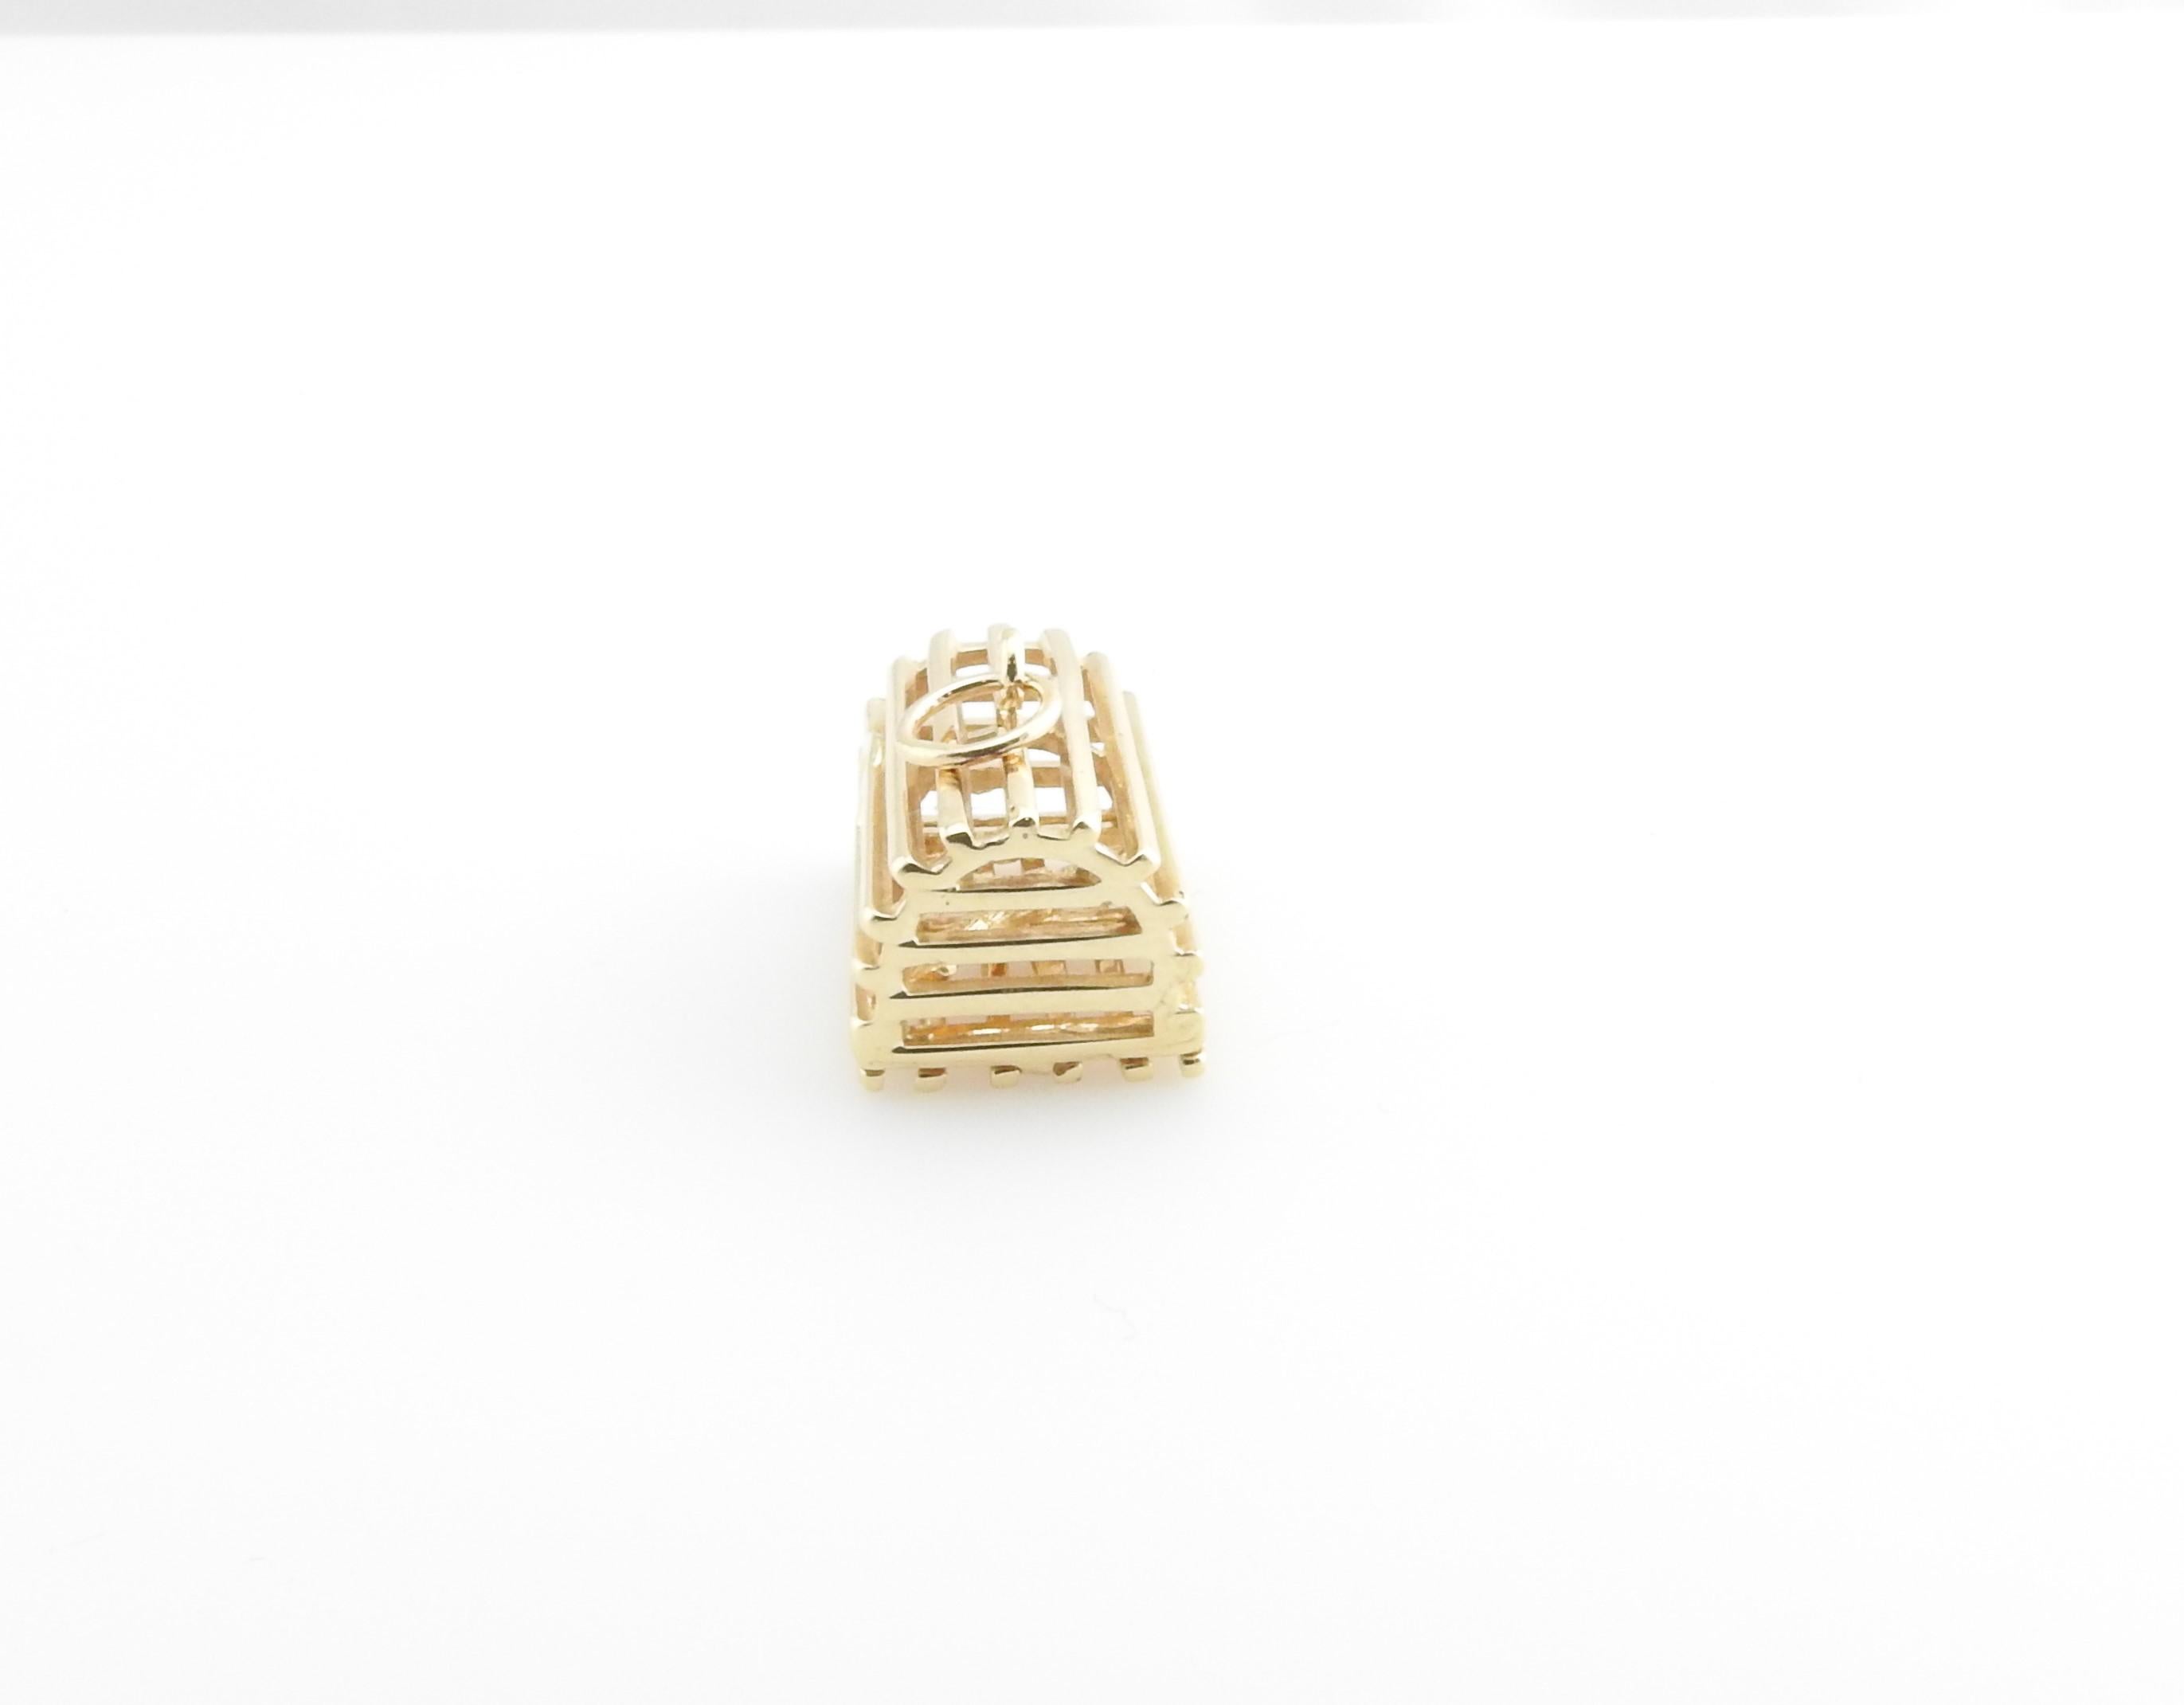 Vintage 14 Karat Yellow Gold Lobster in Trap Charm

This lovely 3D charm features a lobster trap complete with lobster meticulously detailed in 14K yellow gold.

Size: 13 mm x 19 mm actual charm

Weight: 3.4 dwt. / 5.3 gr.

Stamped: 14K

Very good